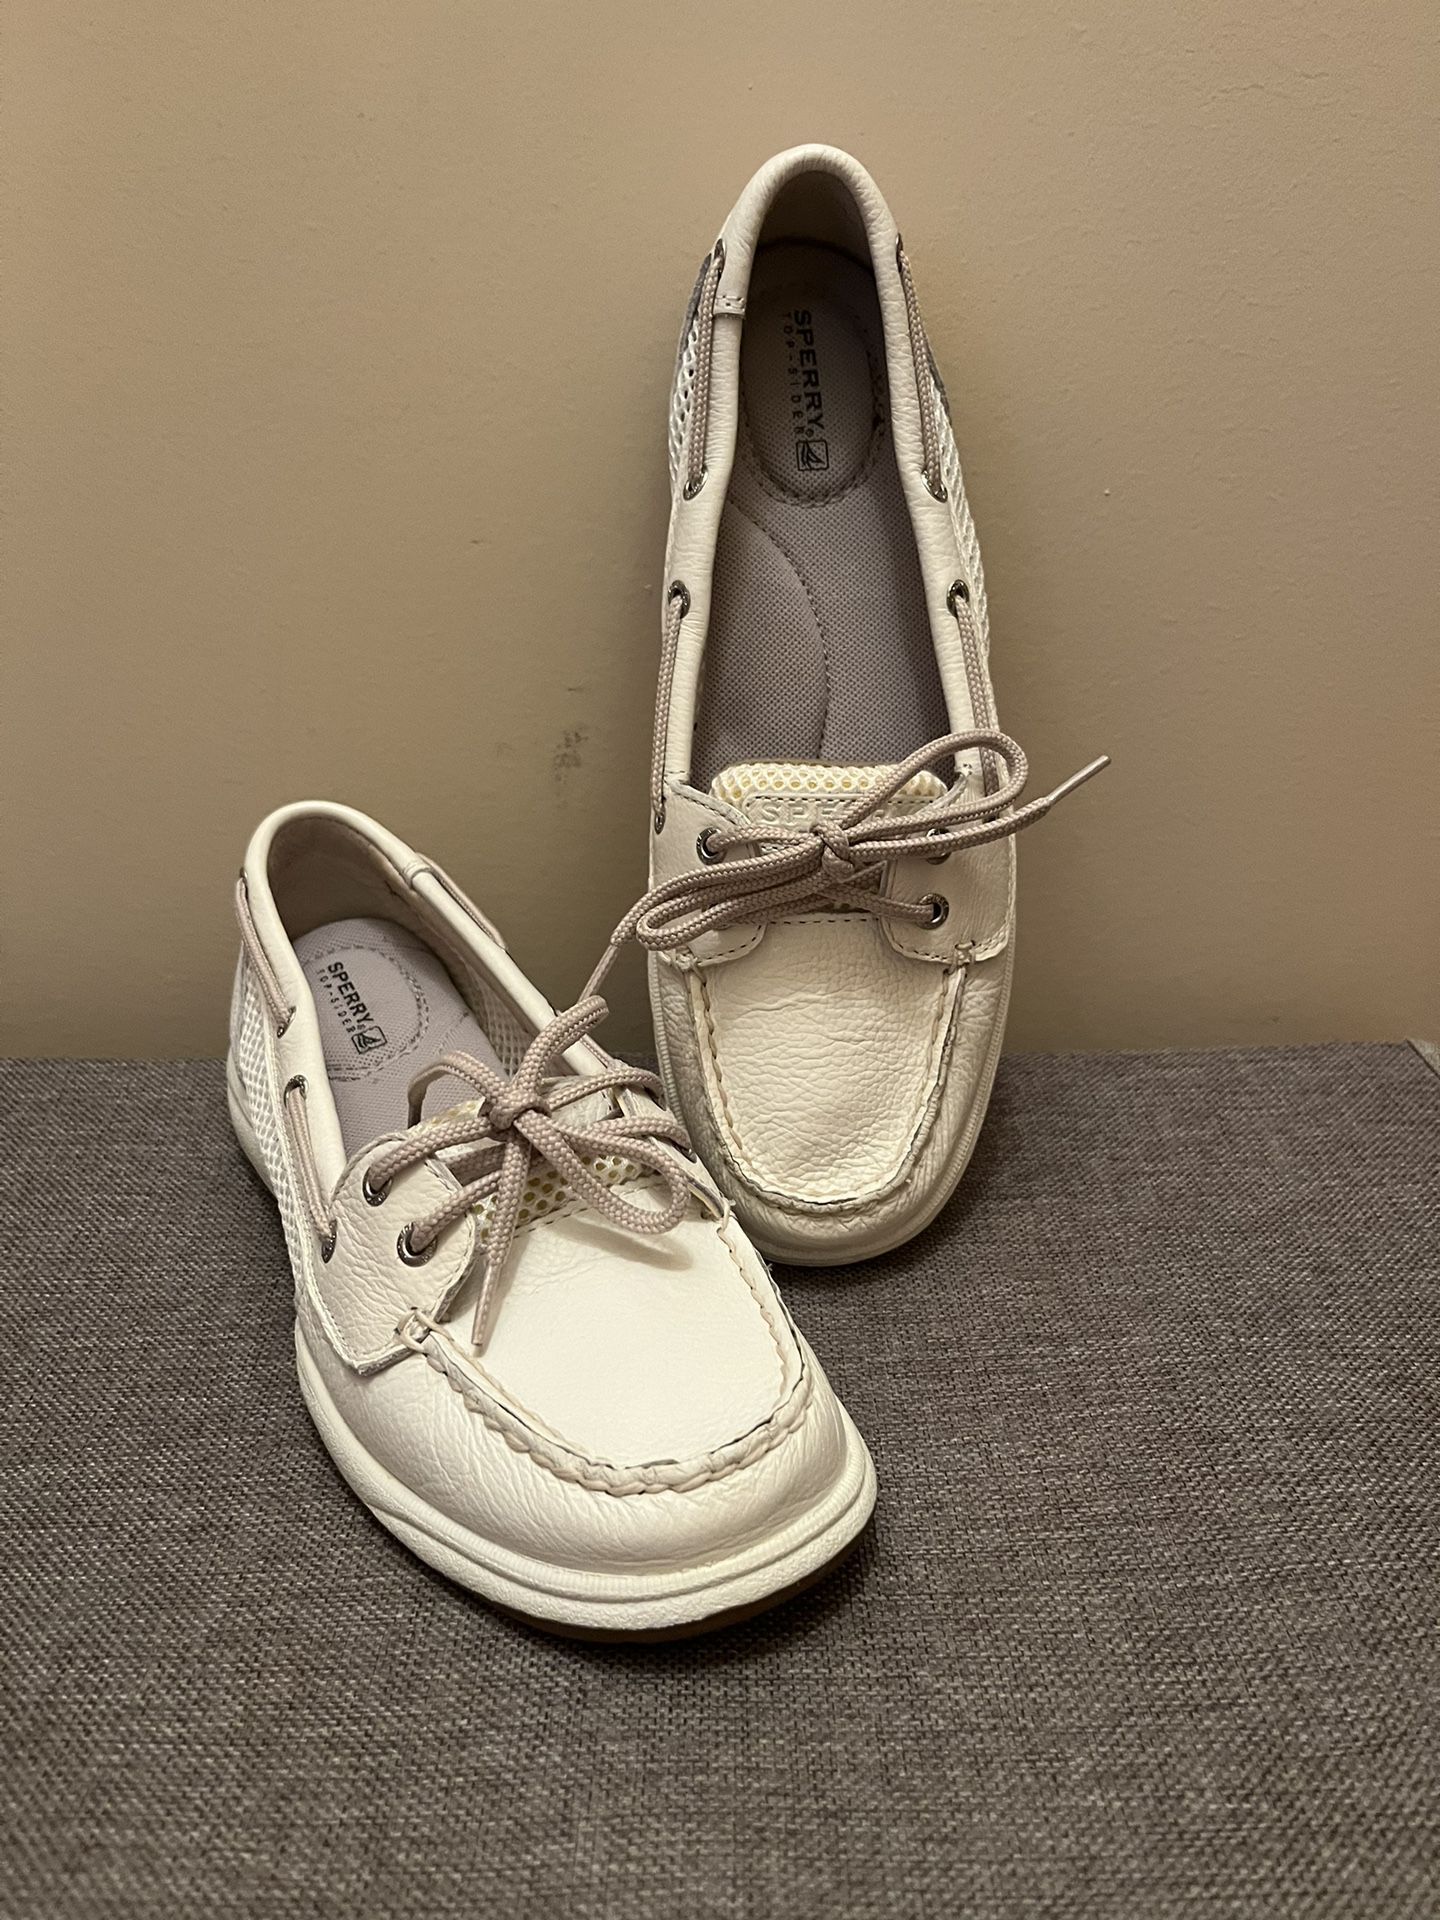 Sperry Top-Sider Women White Leather Mesh Deck Boat Casual Walking Shoes US9